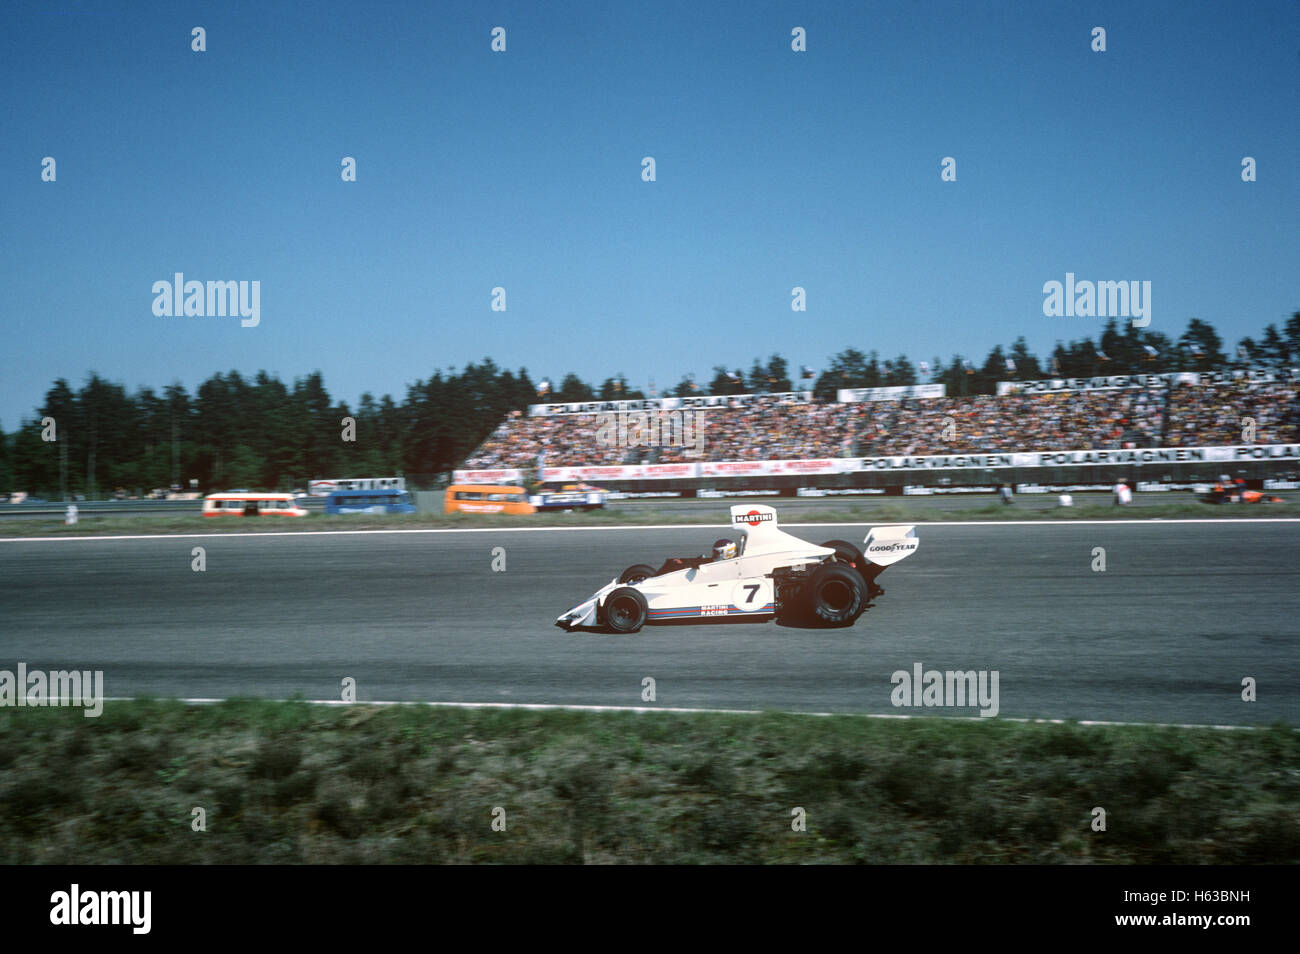 7 Carlos Reutemann in his Brabham Cosworth BT44B  finished 2nd in the Swedish GP Anderstorp 8 June 1975 Stock Photo